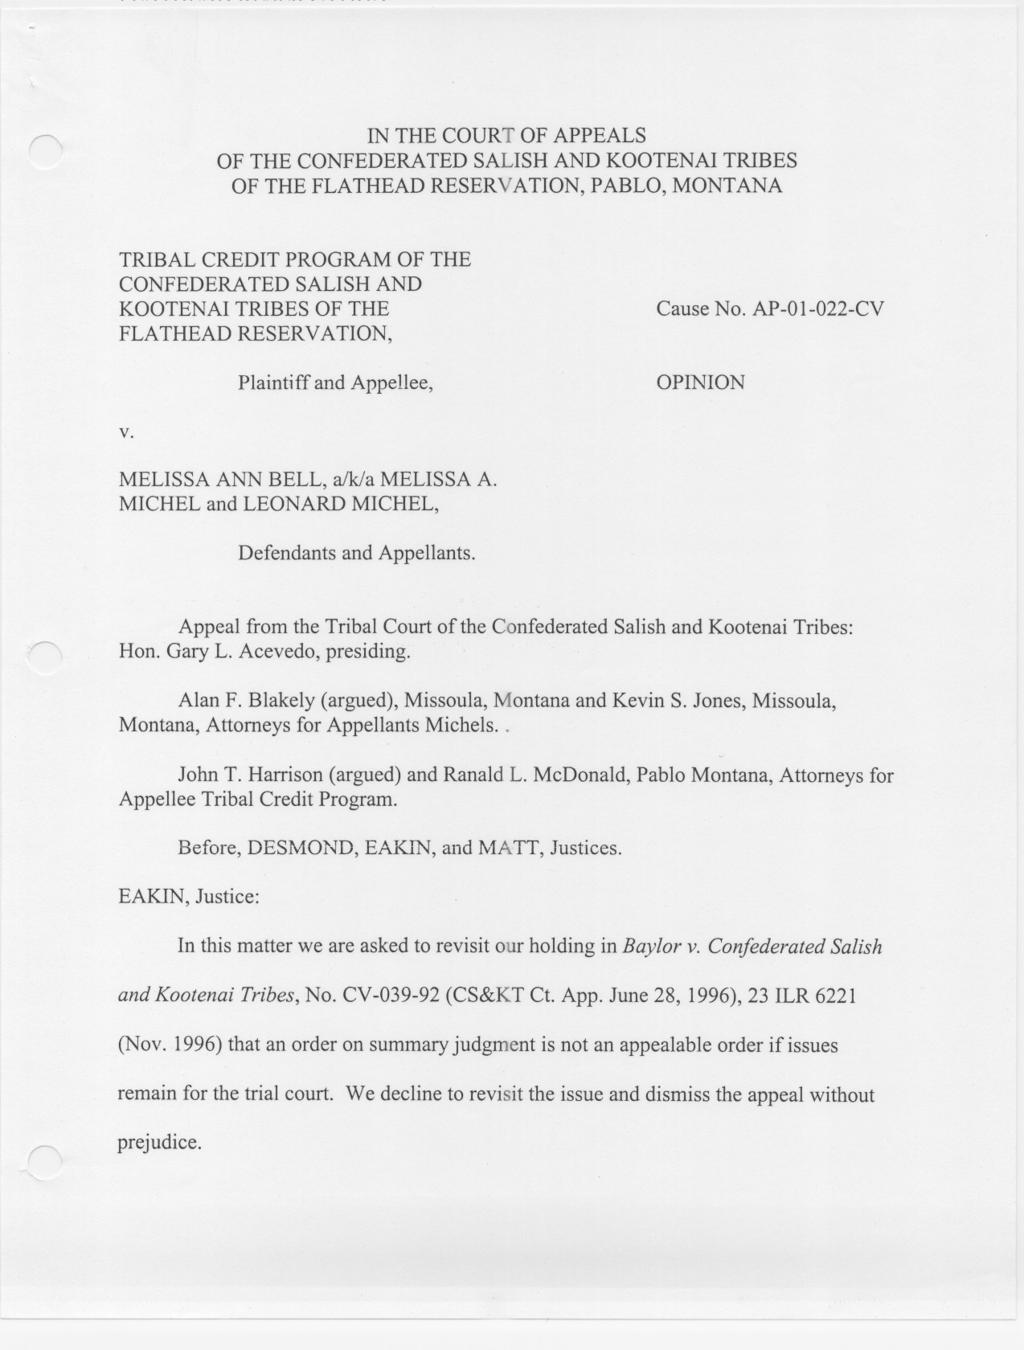 IN THE COURT OF APPEALS OF THE CONFEDERATED SALISH AND KOOTENAI TRIBES OF THE FLATHEAD RESERYATION, PABLO, MONTANA TRIBAL CREDIT PROGRAM OF THE CONFEDERATED SALISH AND KOOTENAI TRIBES OF THE FLATHEAD